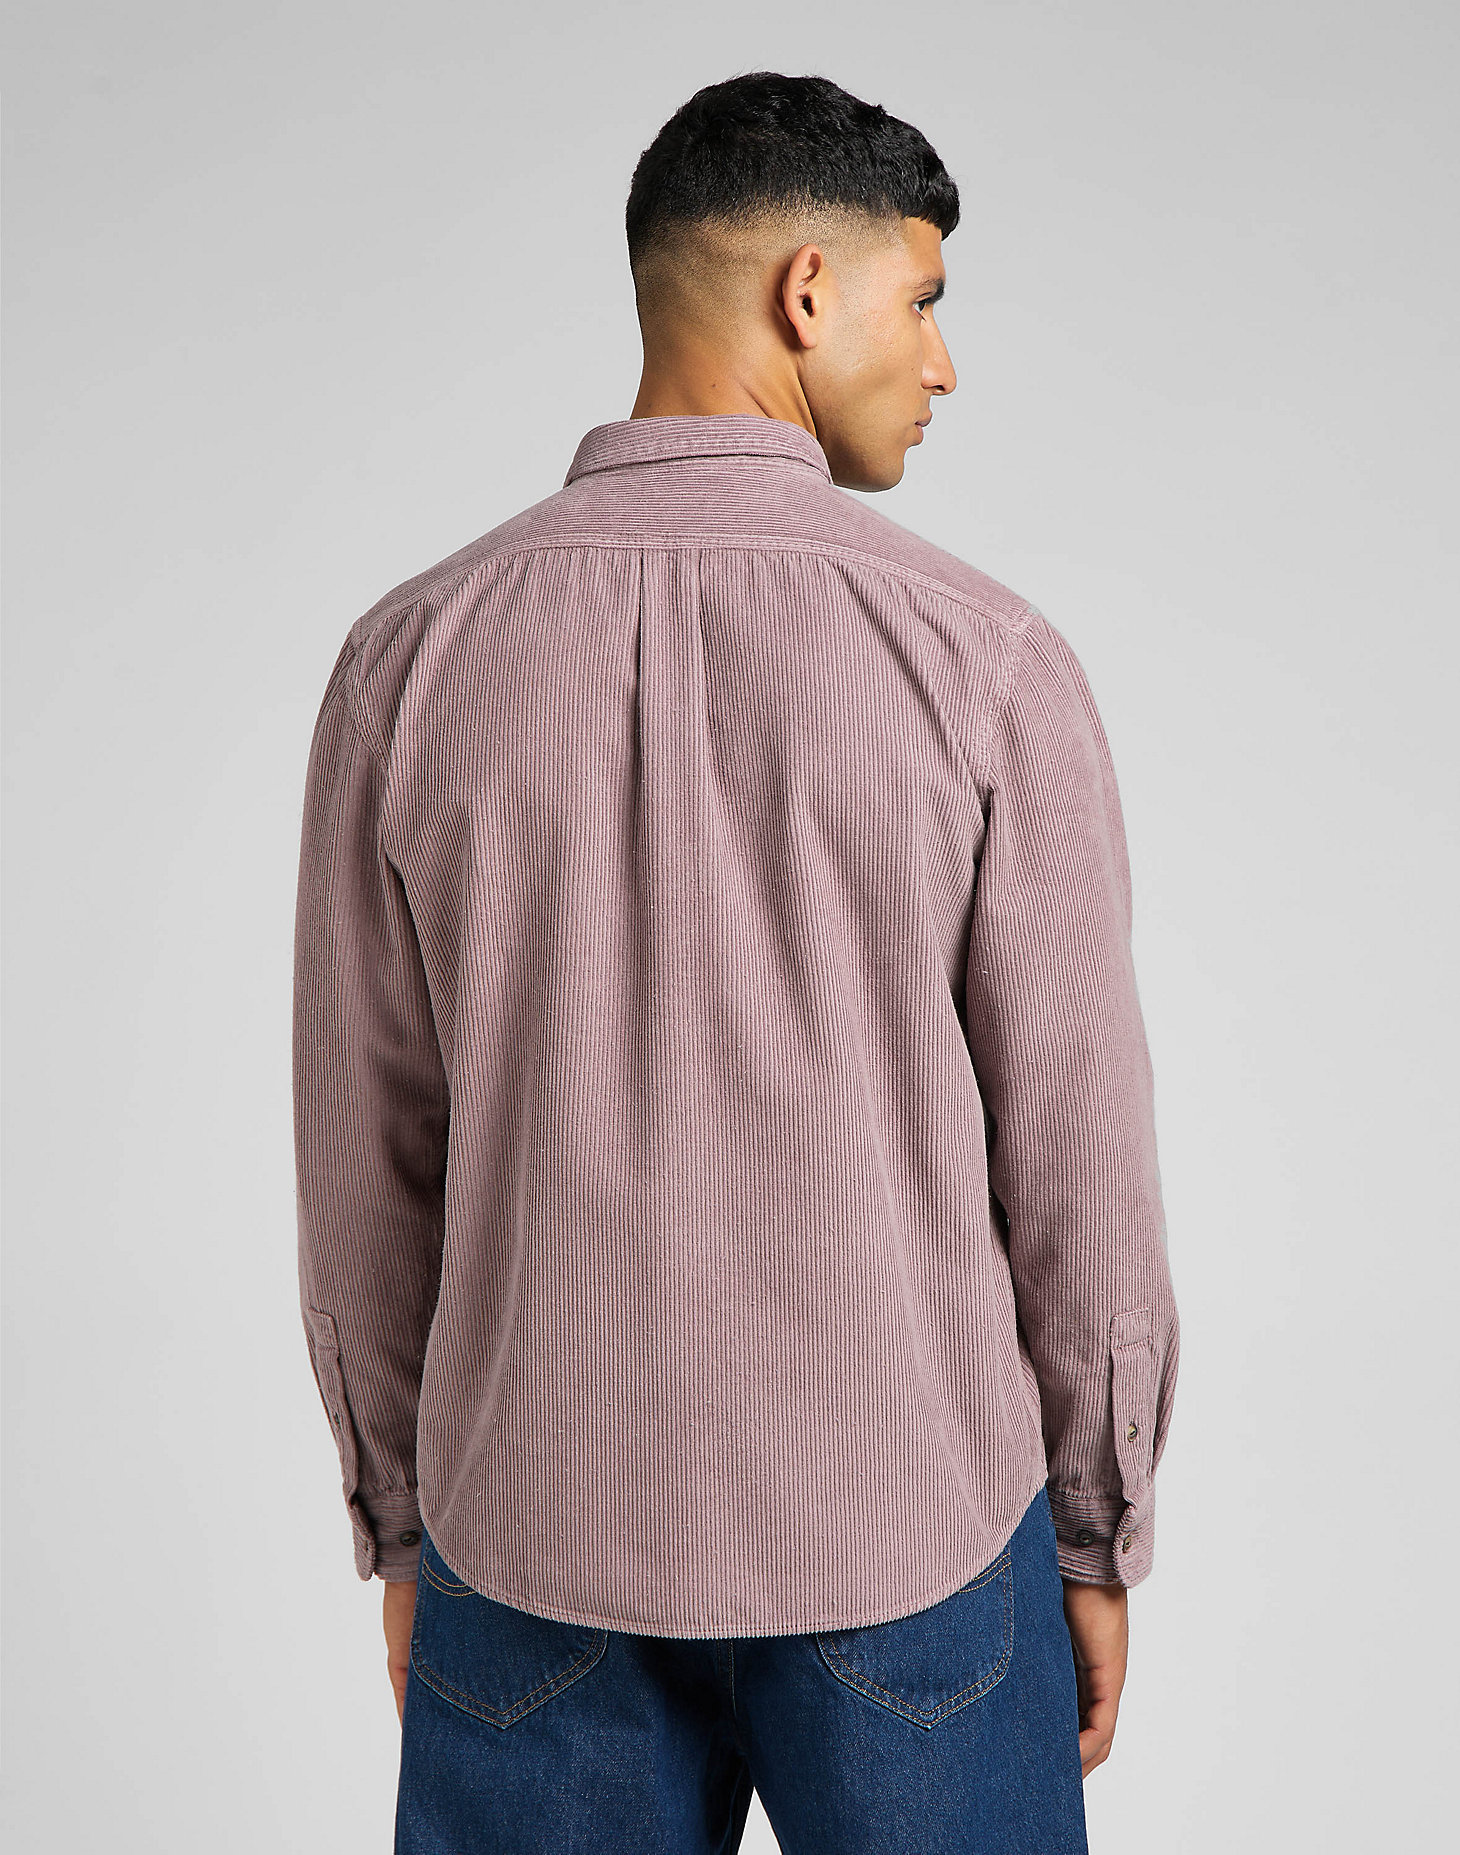 Riveted Shirt in Purple Storm alternative view 1